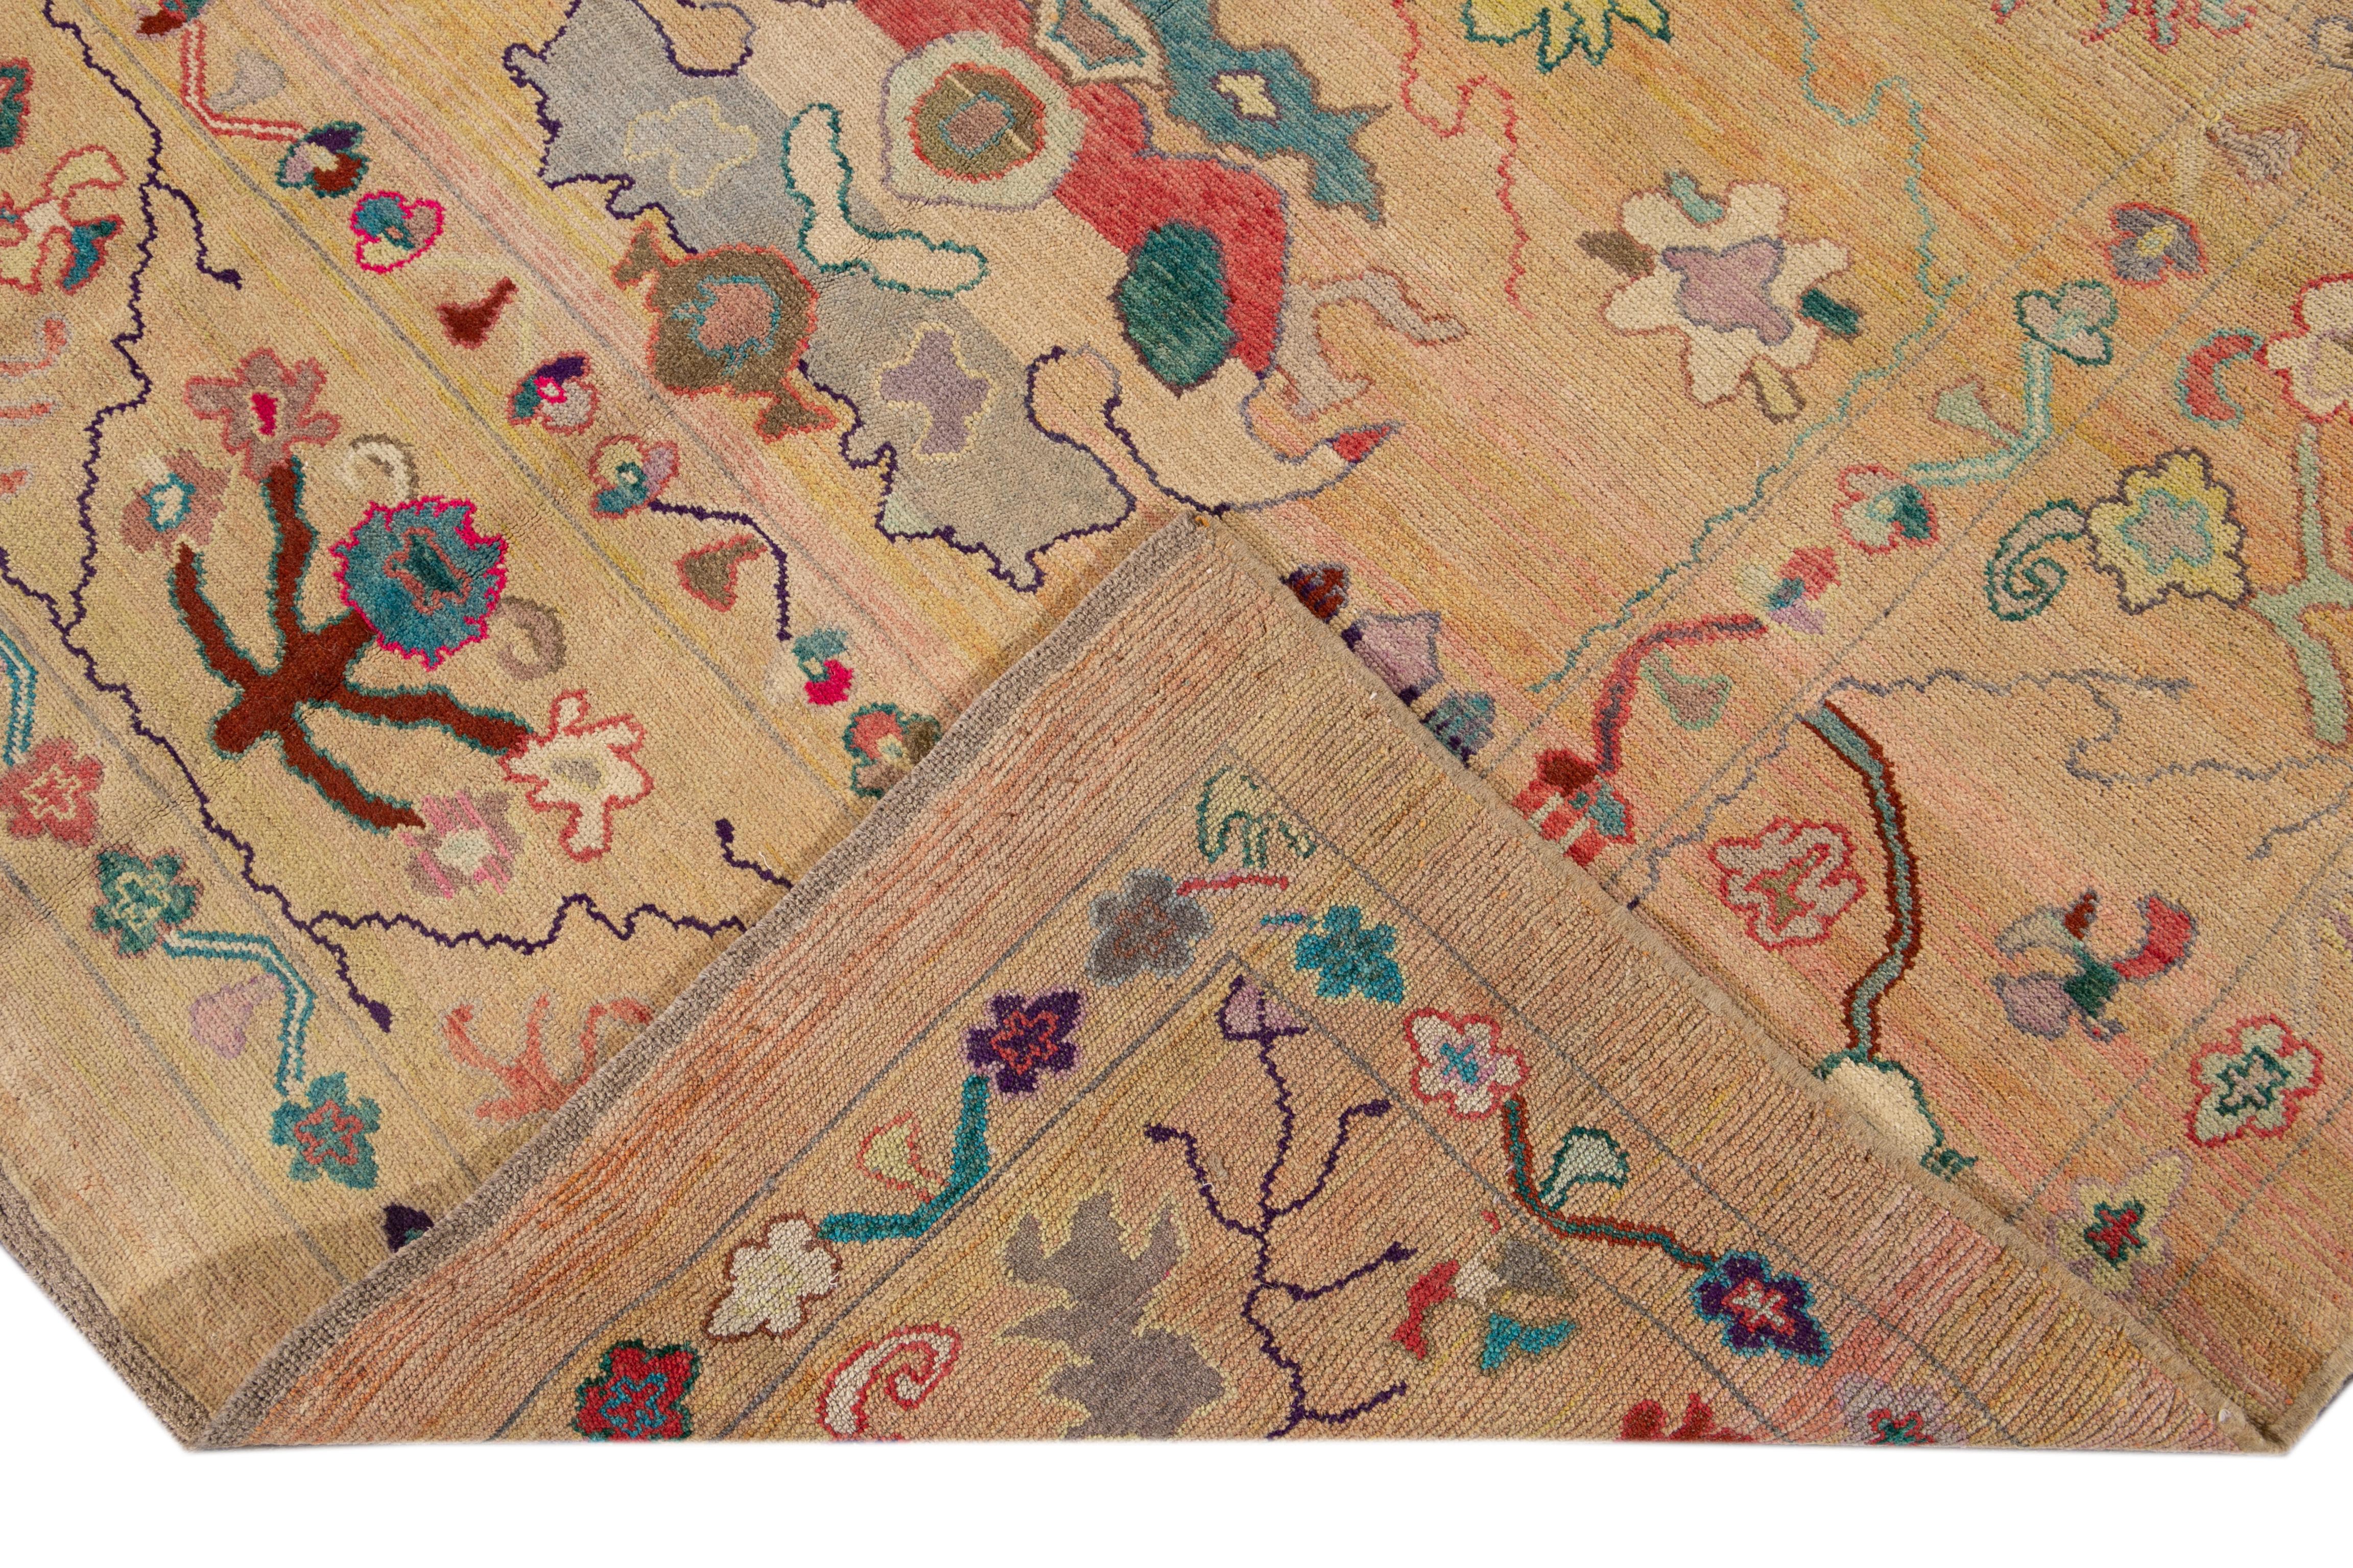 Beautiful modern hand-knotted wool rug with a peach field. This Revival Collection rug has Bright multi-color accents all-over a gorgeous geometric Floral design.

This rug measures 6'7